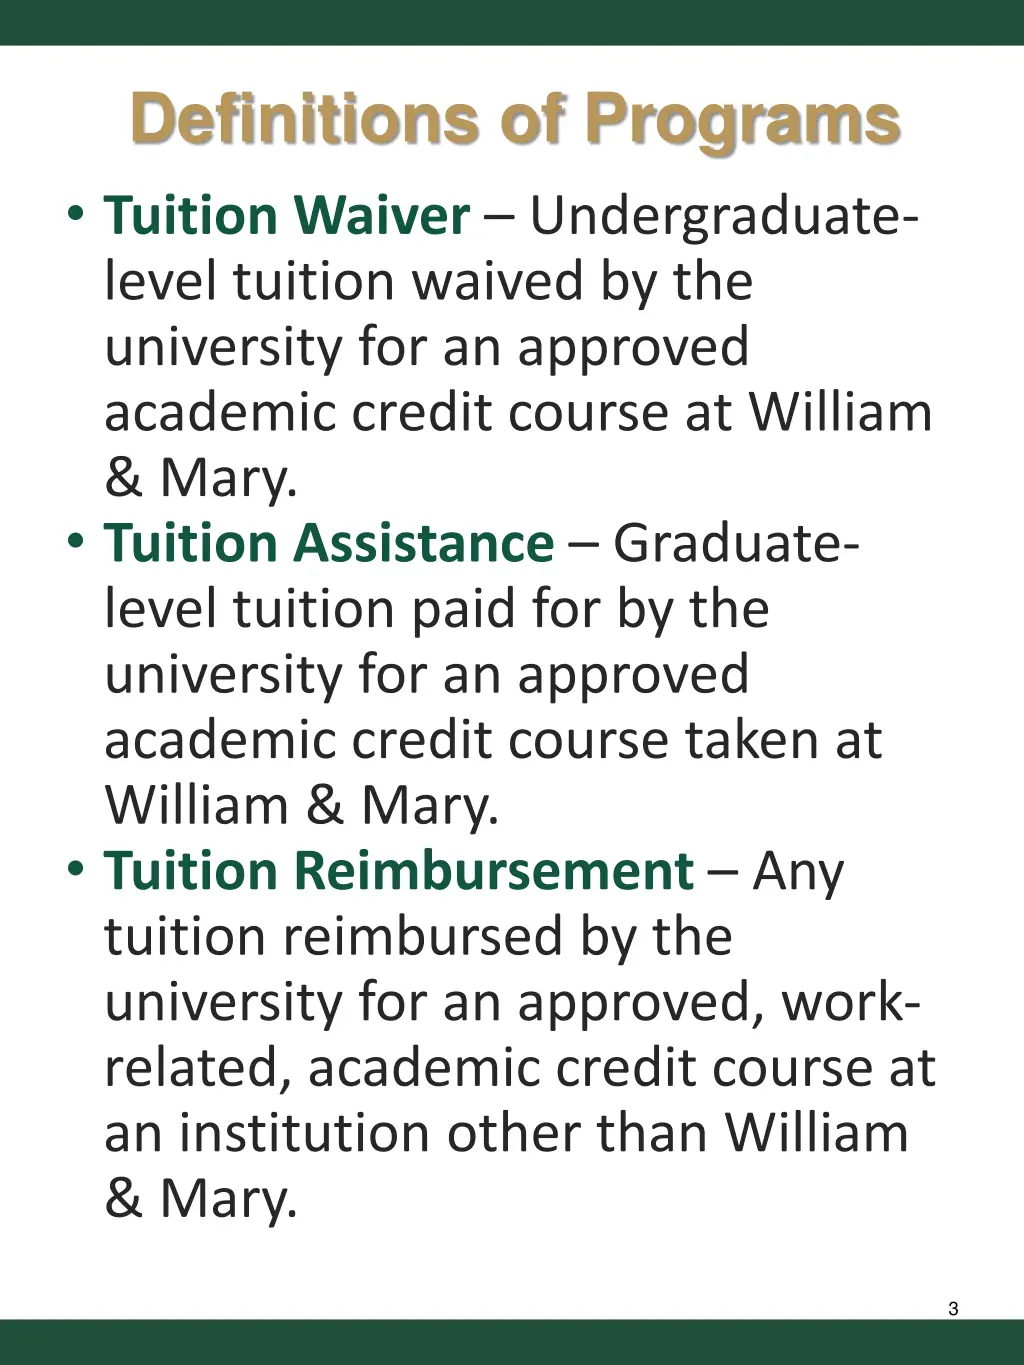 definitions of programs tuition waiver